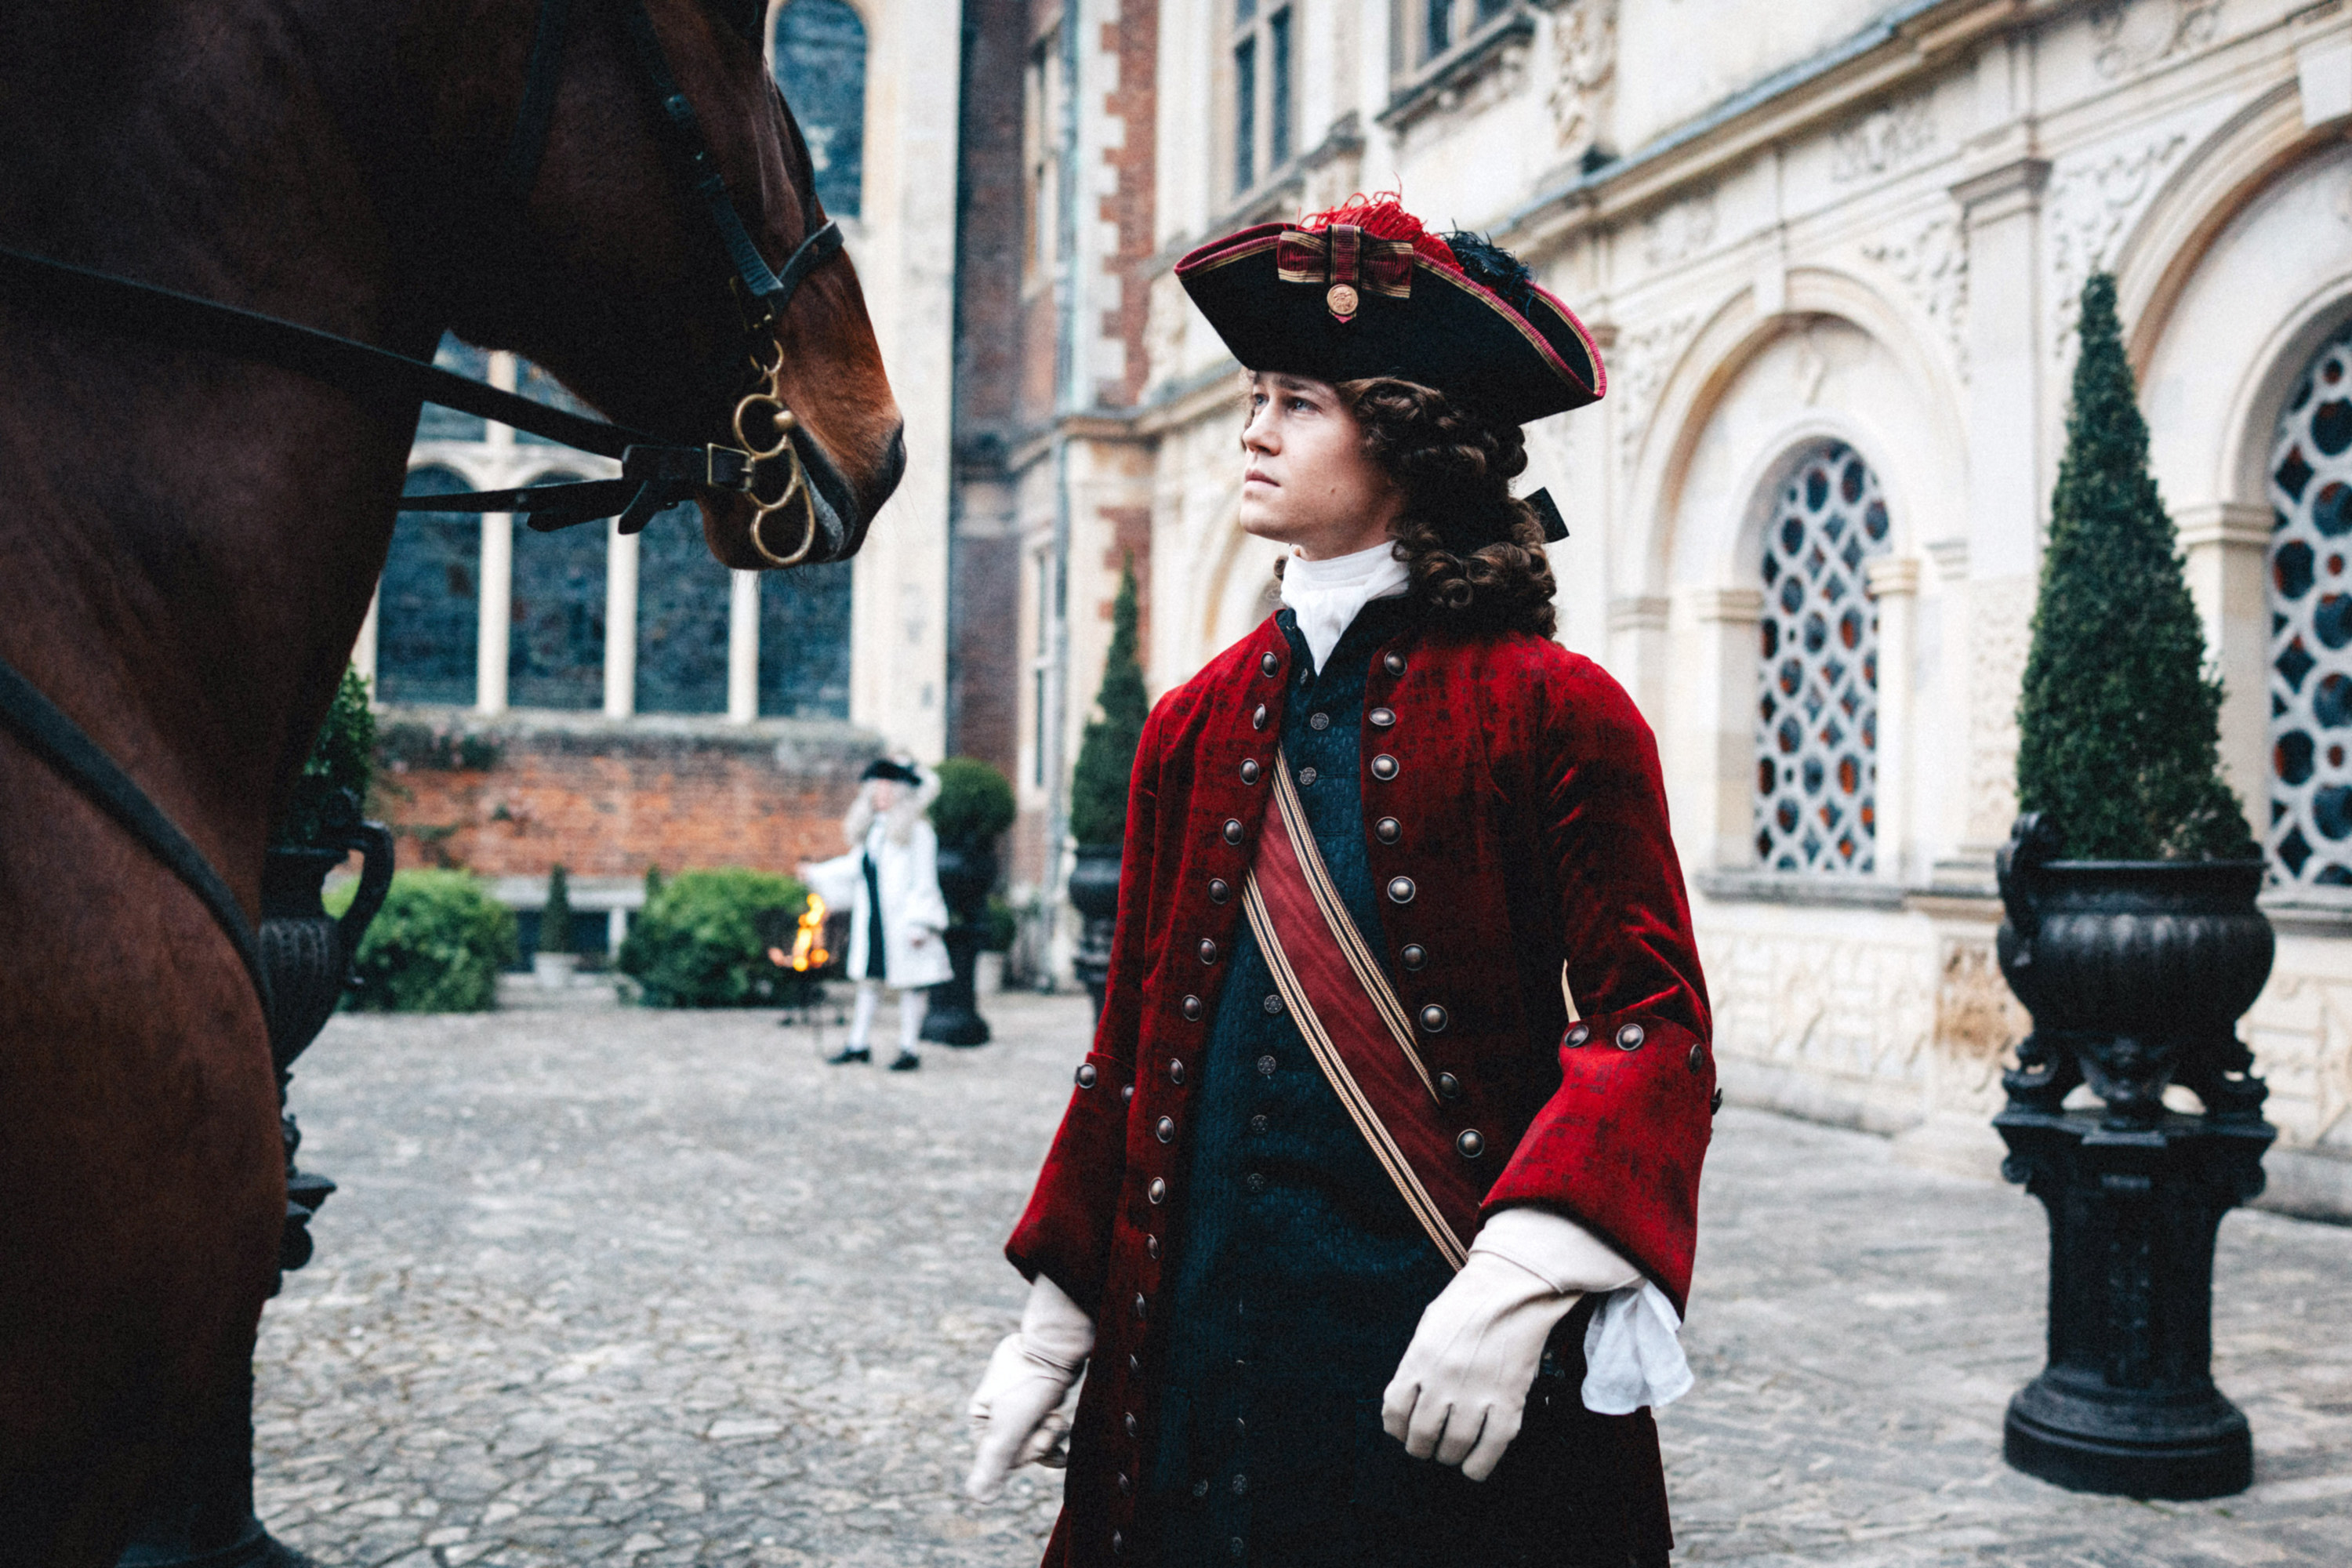 Joe Alwyn, dressed in 18th-century clothes, wig, and hat, stands outside in front of a brown horse